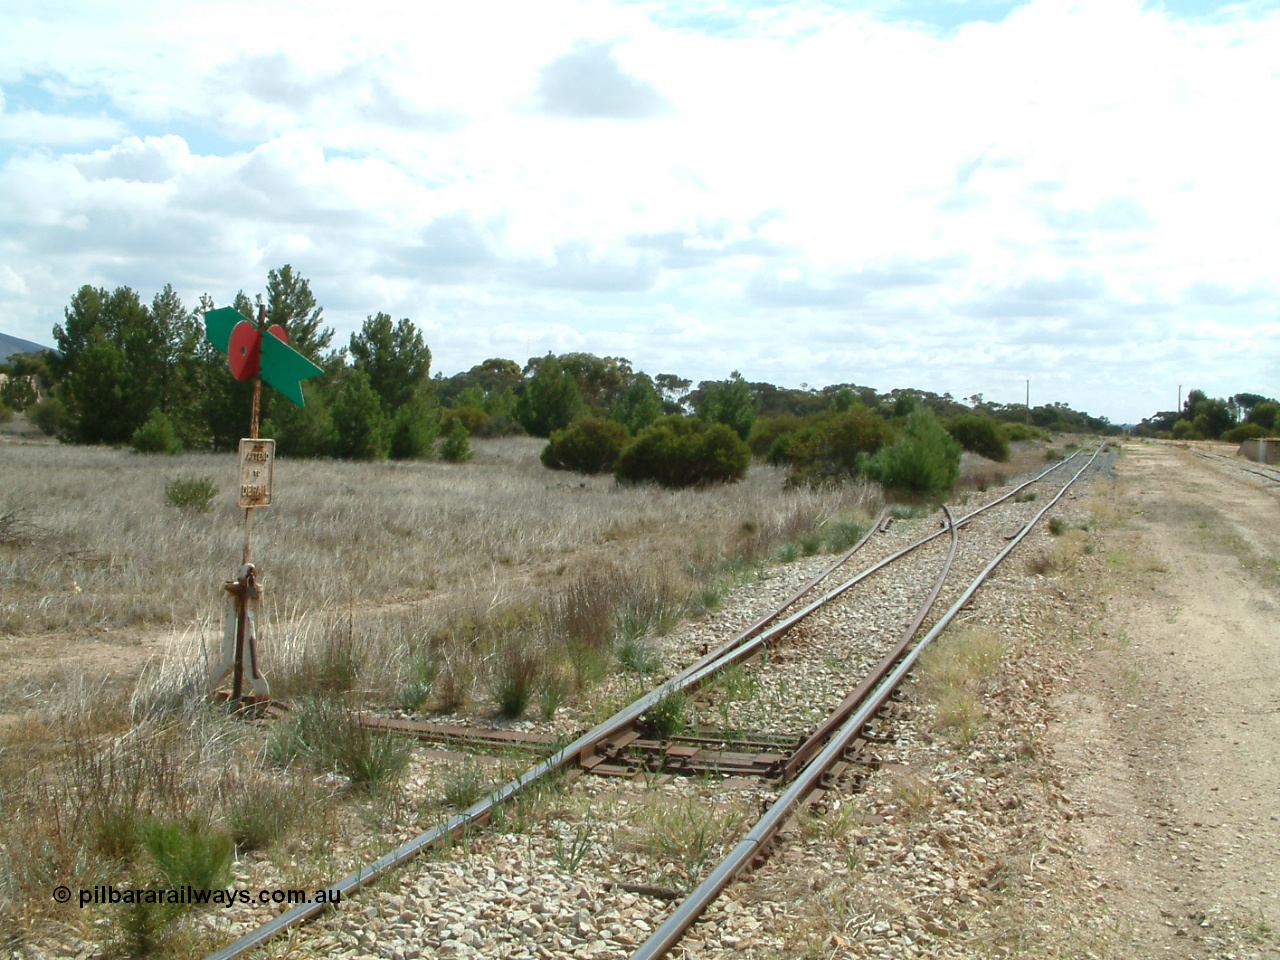 030409 112332
Darke Peake, view looking north from the south end of the triangle, point lever with rail just visible heading into the bush, goods and grain siding with loading ramp at far right.
